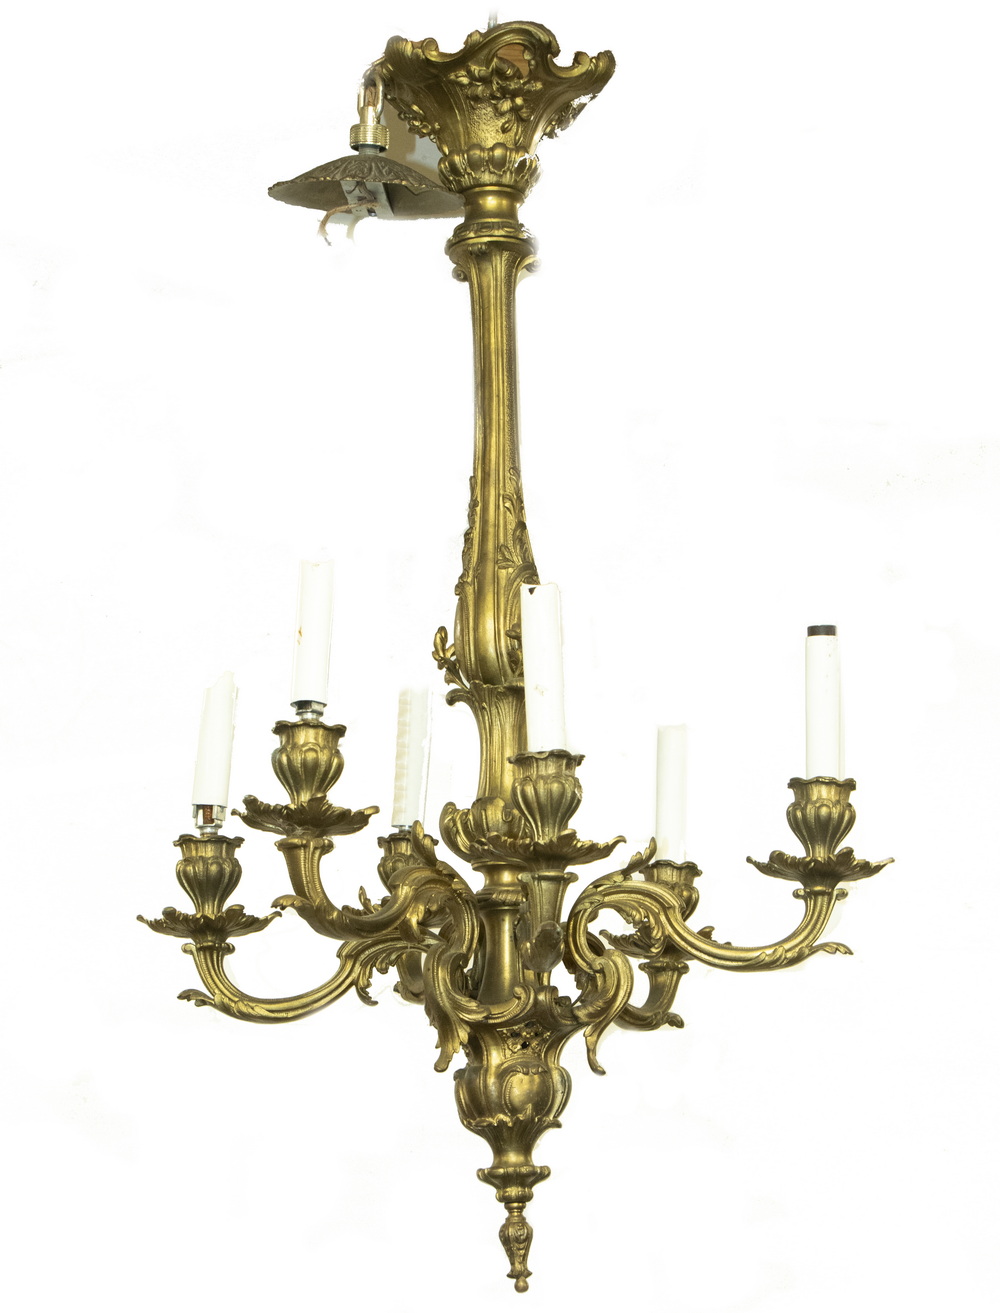 ROCOCO STYLE CHANDELIER 19th c  2b3a9d